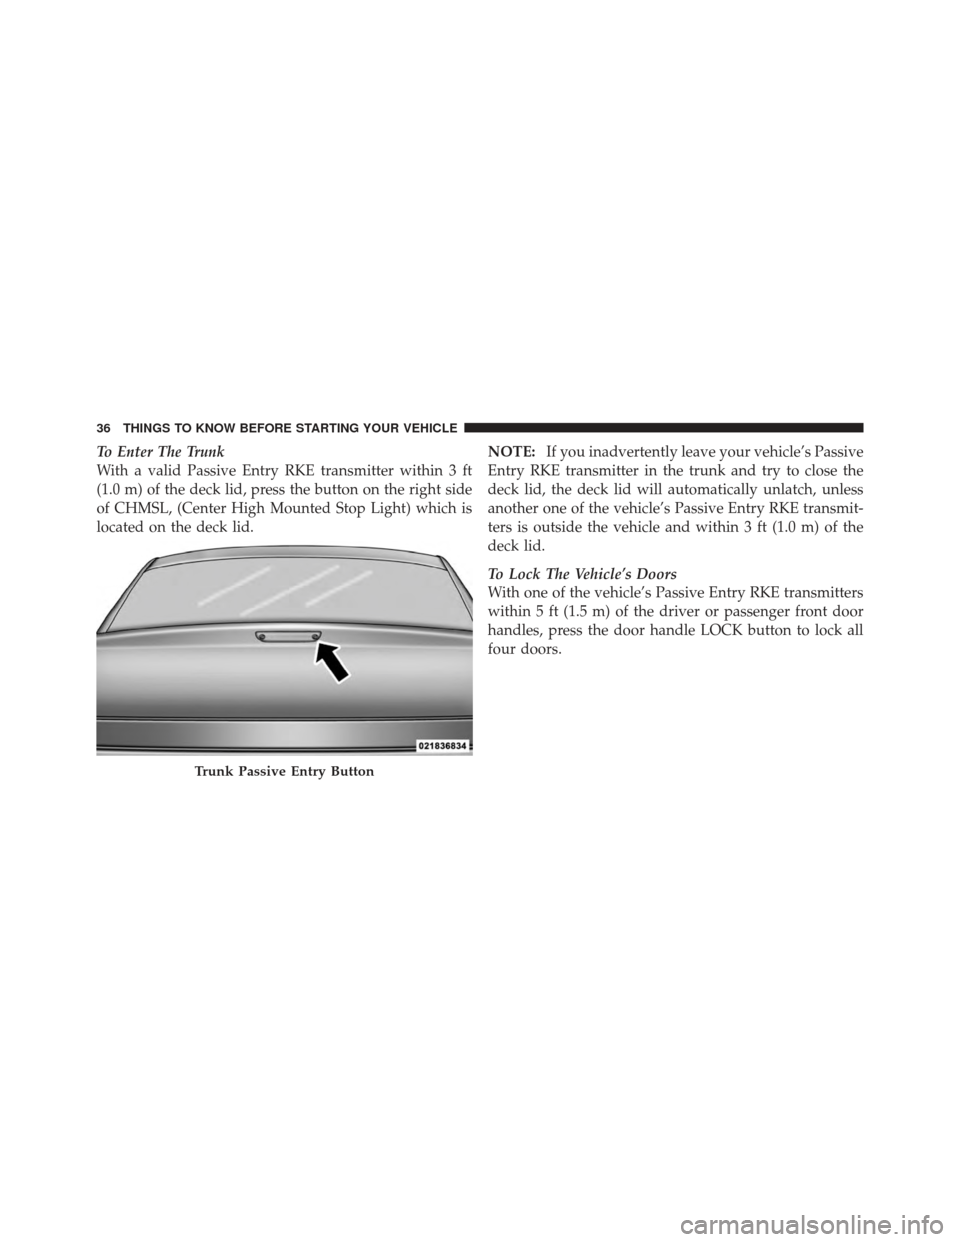 CHRYSLER 300 2011 2.G Owners Guide To Enter The Trunk
With a valid Passive Entry RKE transmitter within 3 ft
(1.0 m) of the deck lid, press the button on the right side
of CHMSL, (Center High Mounted Stop Light) which is
located on the